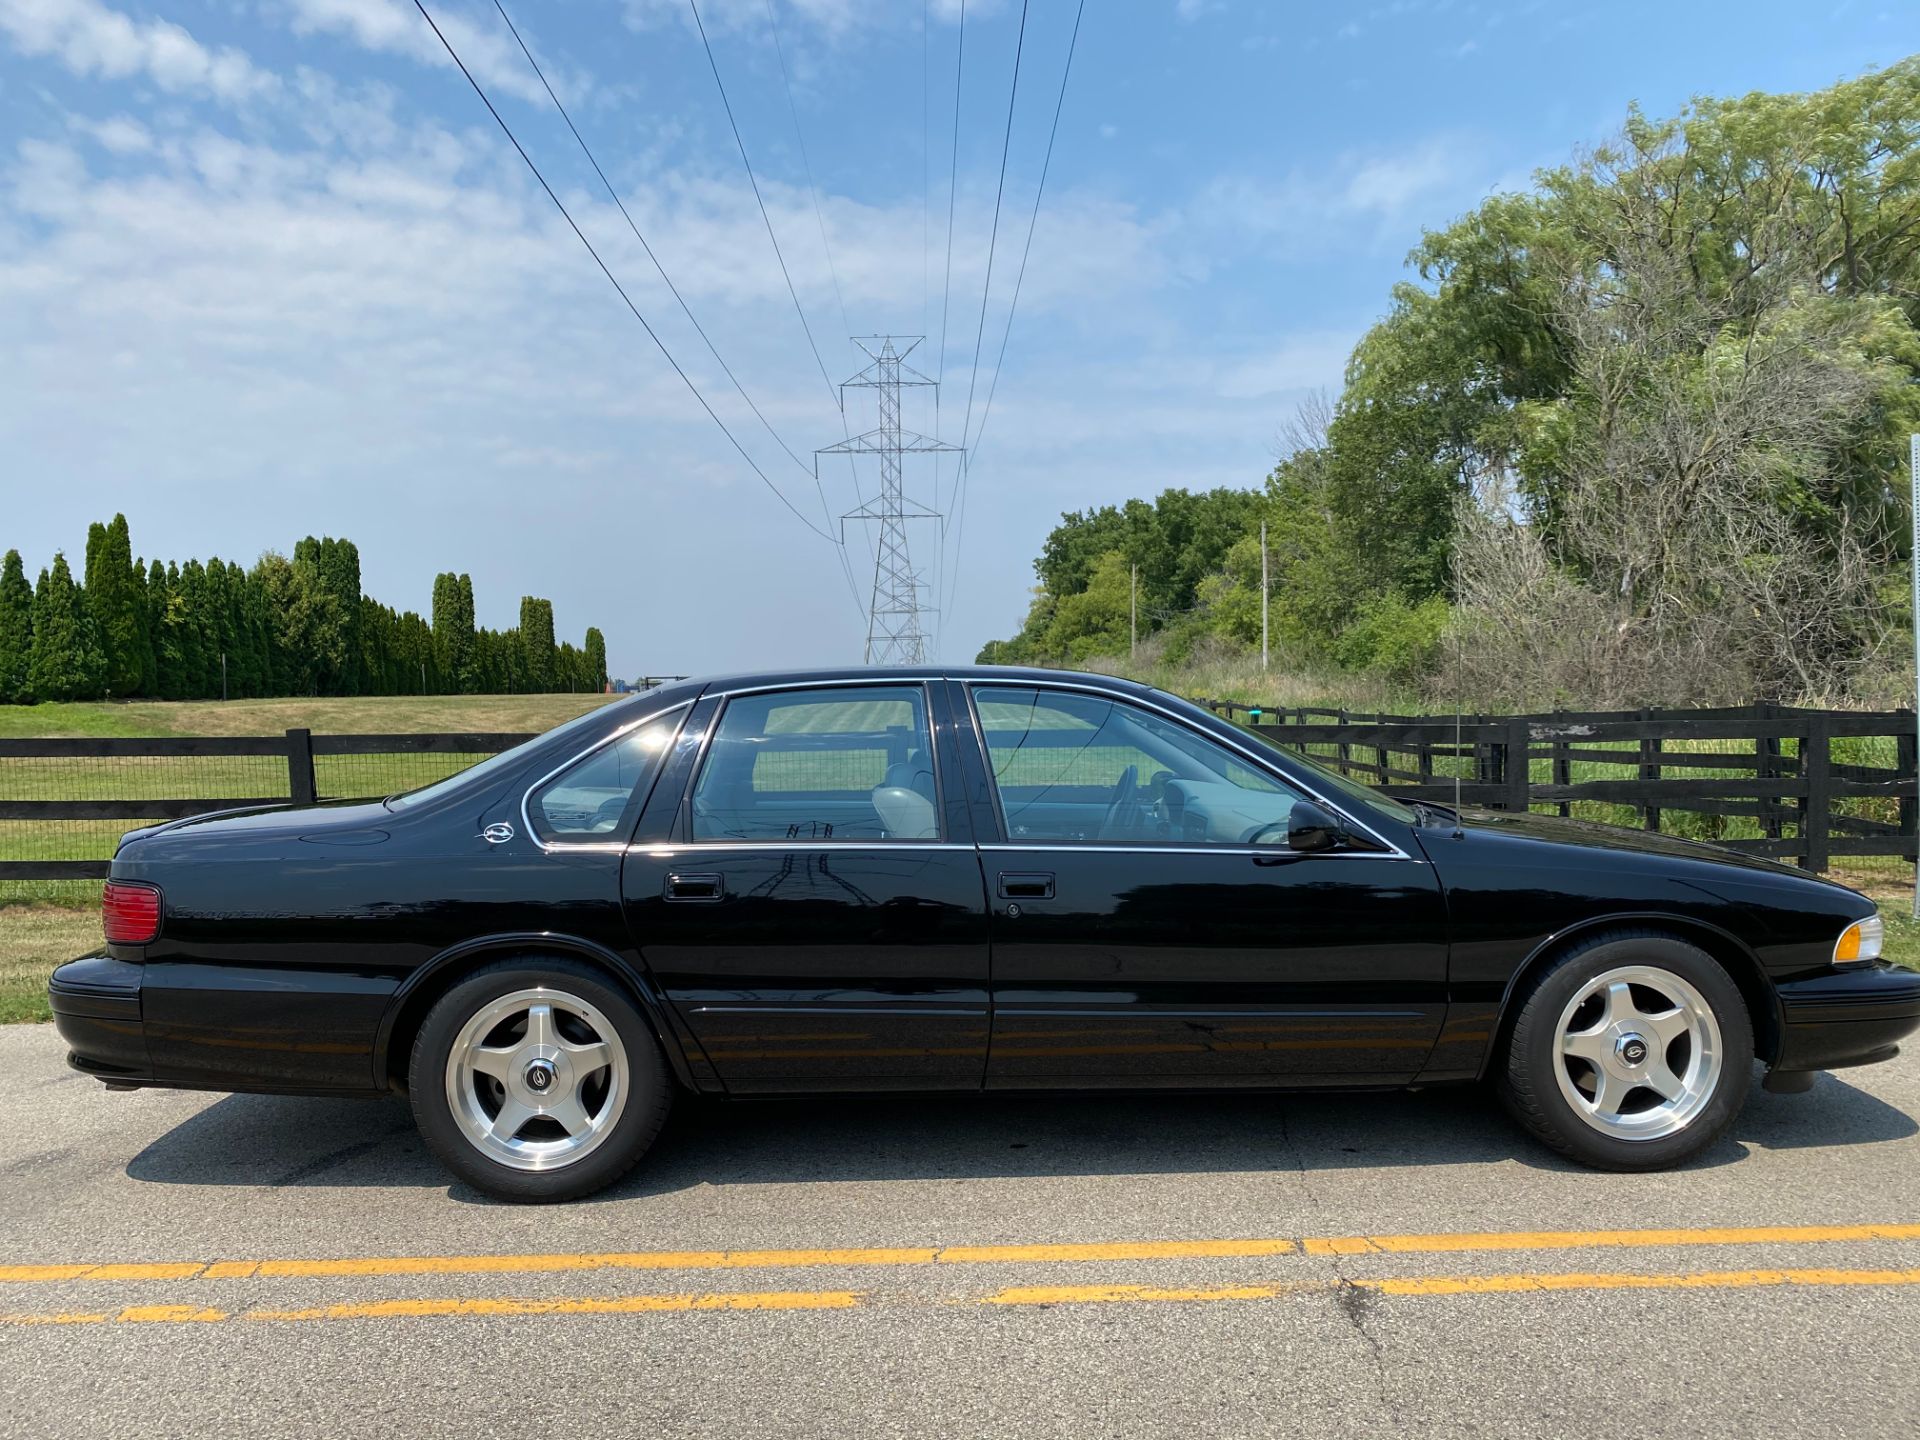 1996 Chevrolet Impala SS in Big Bend, Wisconsin - Photo 19